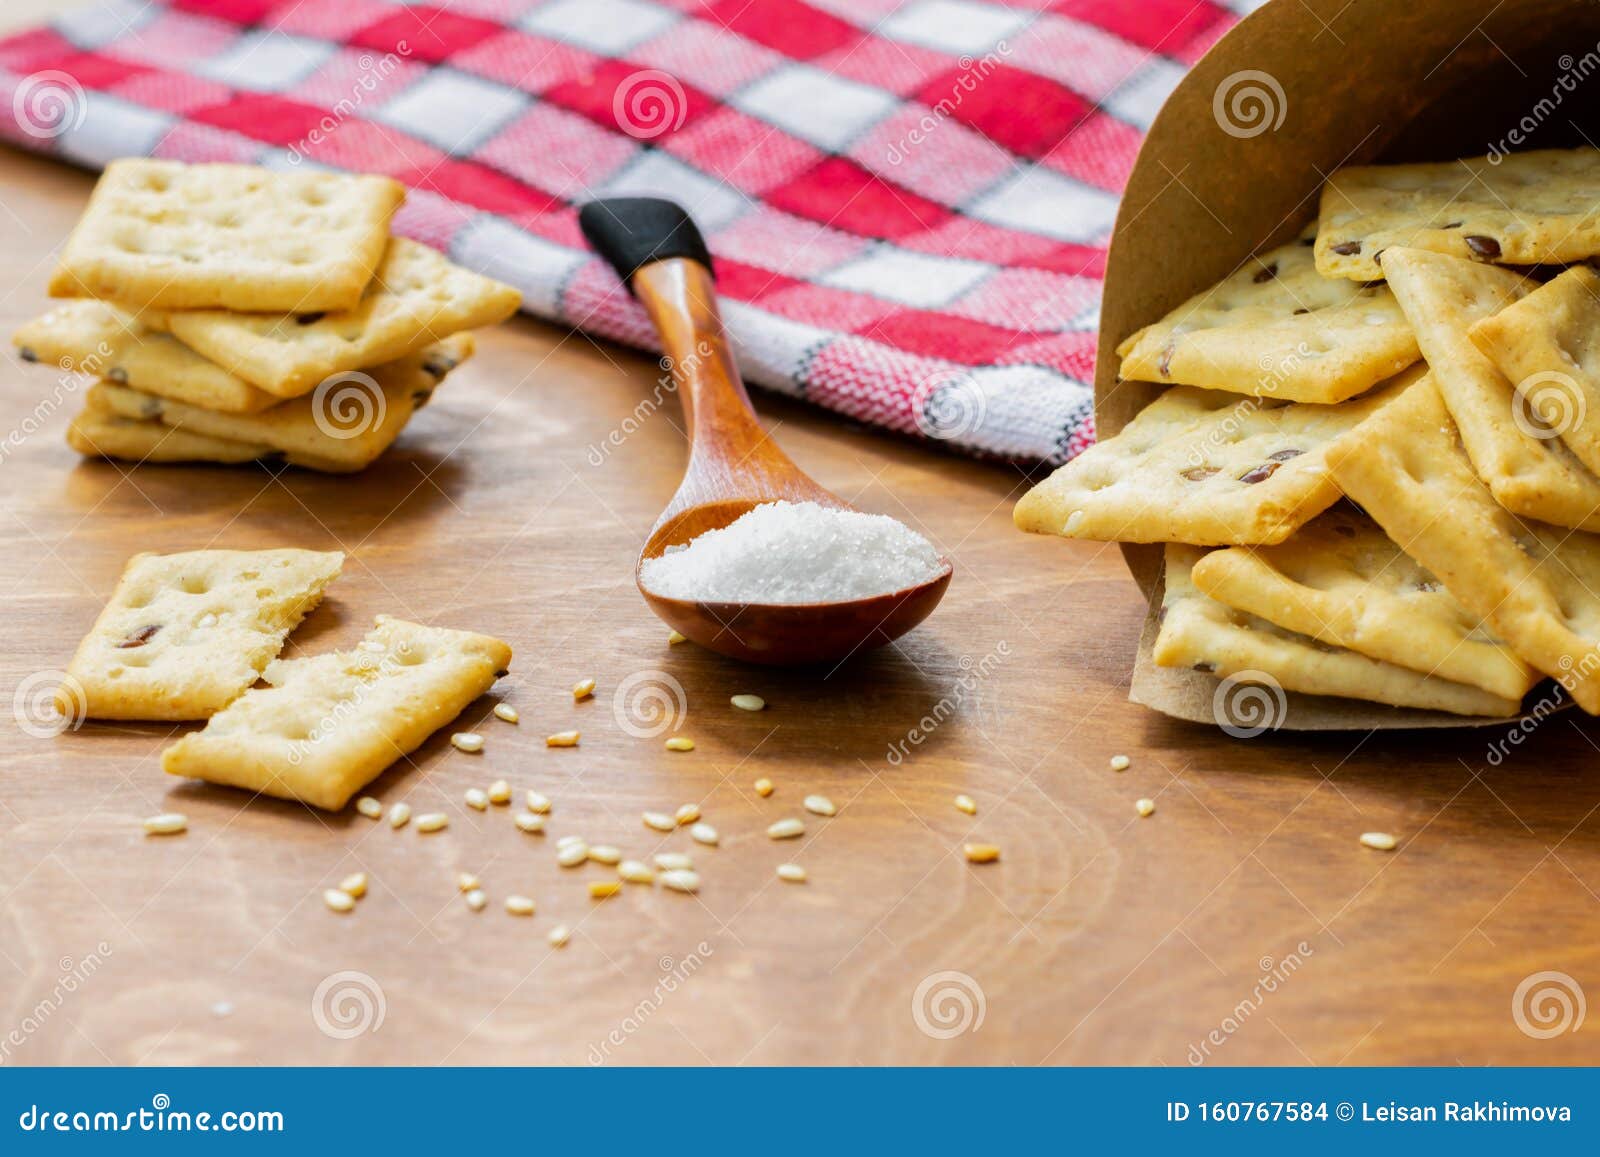 crispy salted crackers, wooden spoon with salt crystalls, paper bag full of crackers on a red napkin on wooden table.